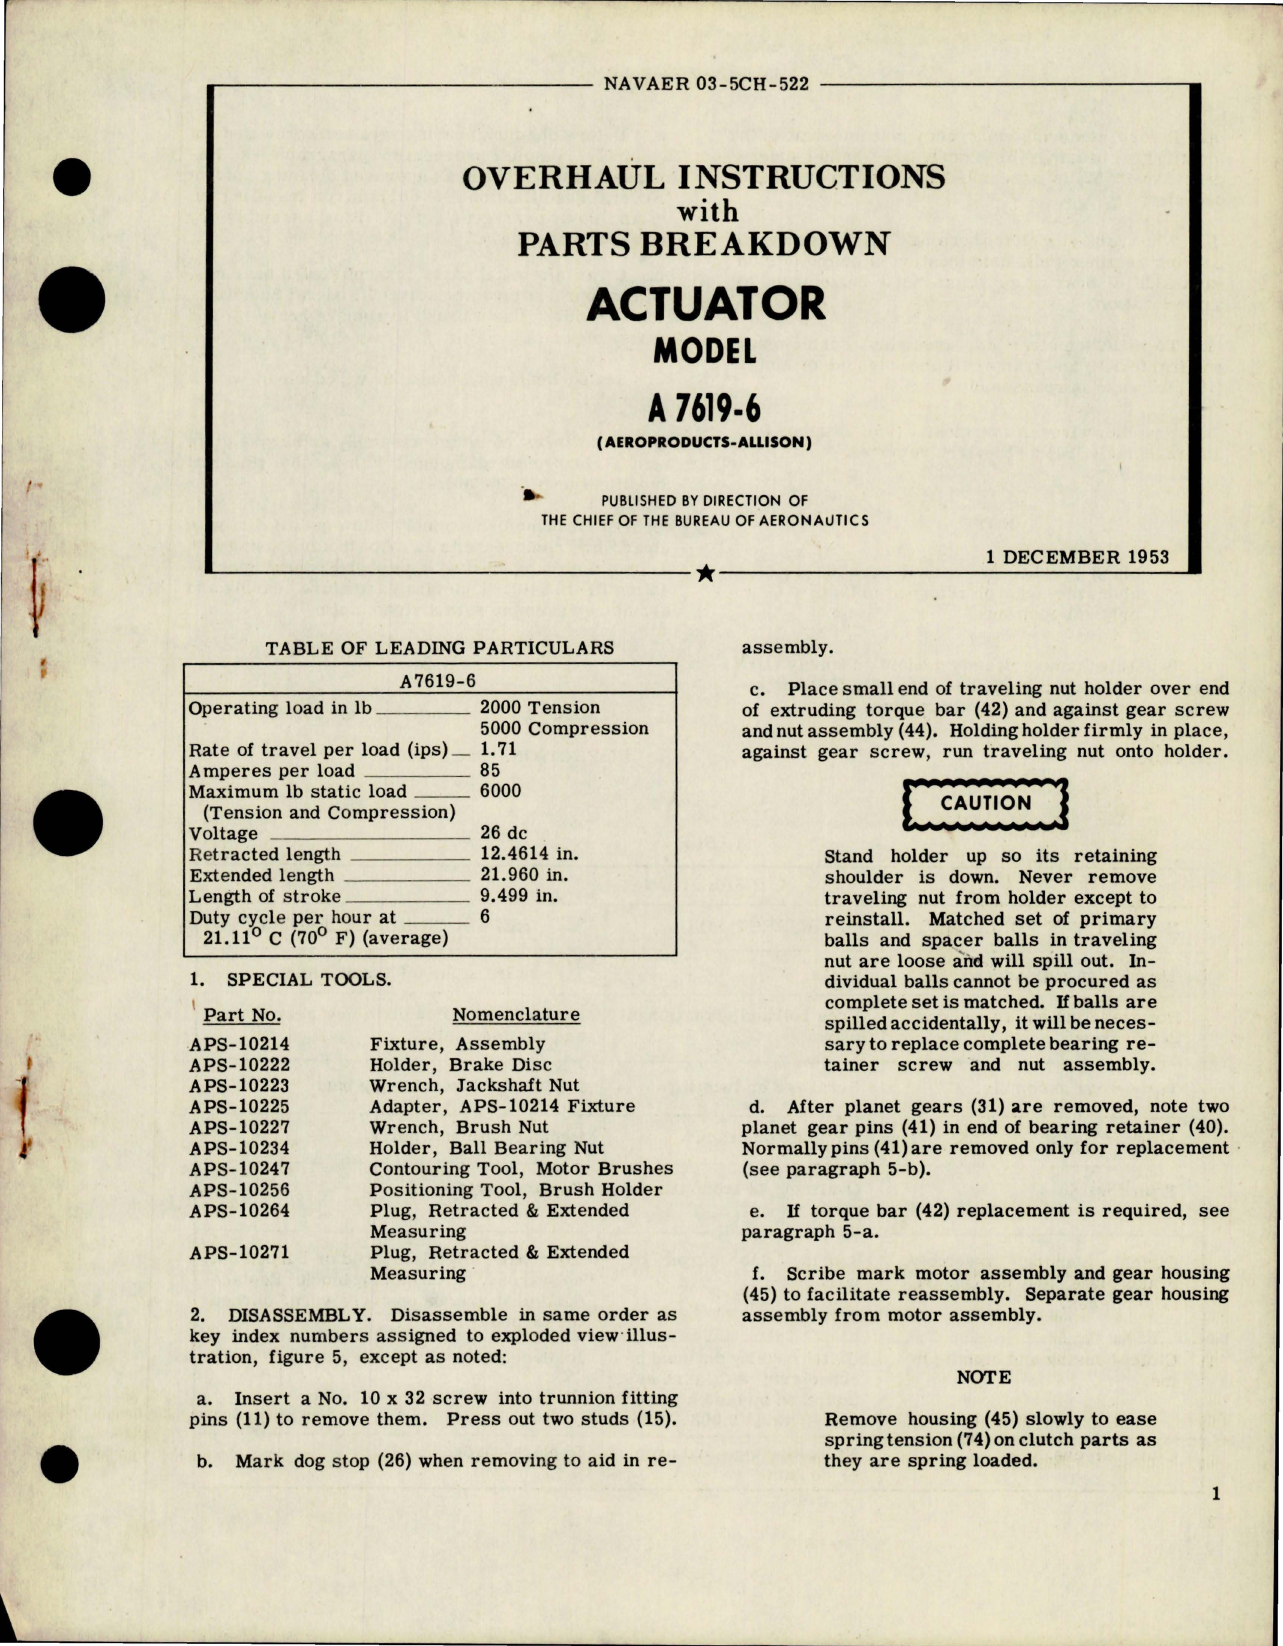 Sample page 1 from AirCorps Library document: Overhaul Instructions with Parts Breakdown for Actuator - Model A 7619-6 